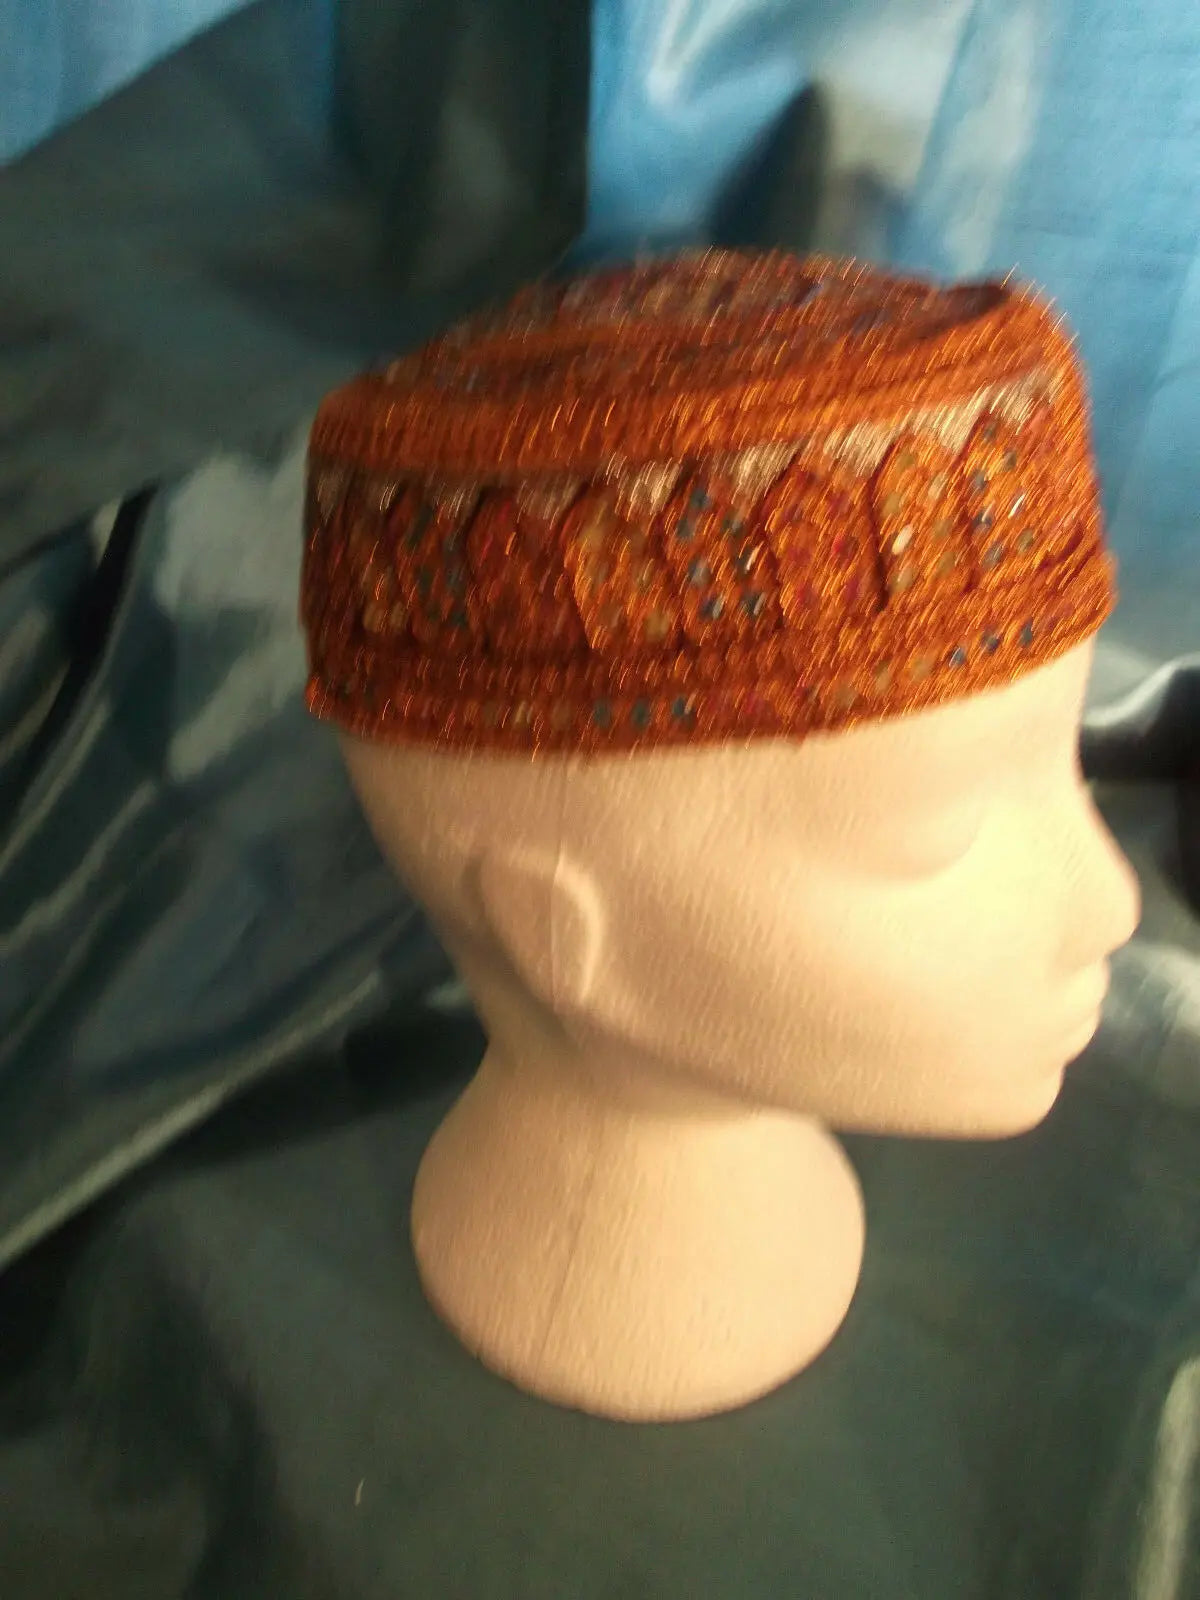 punk/cosplay/festi/stagewear/costume/ ORANGE FEZ STYLE HAT WITH SEQUINS 22"/55CM unbranded. vintage